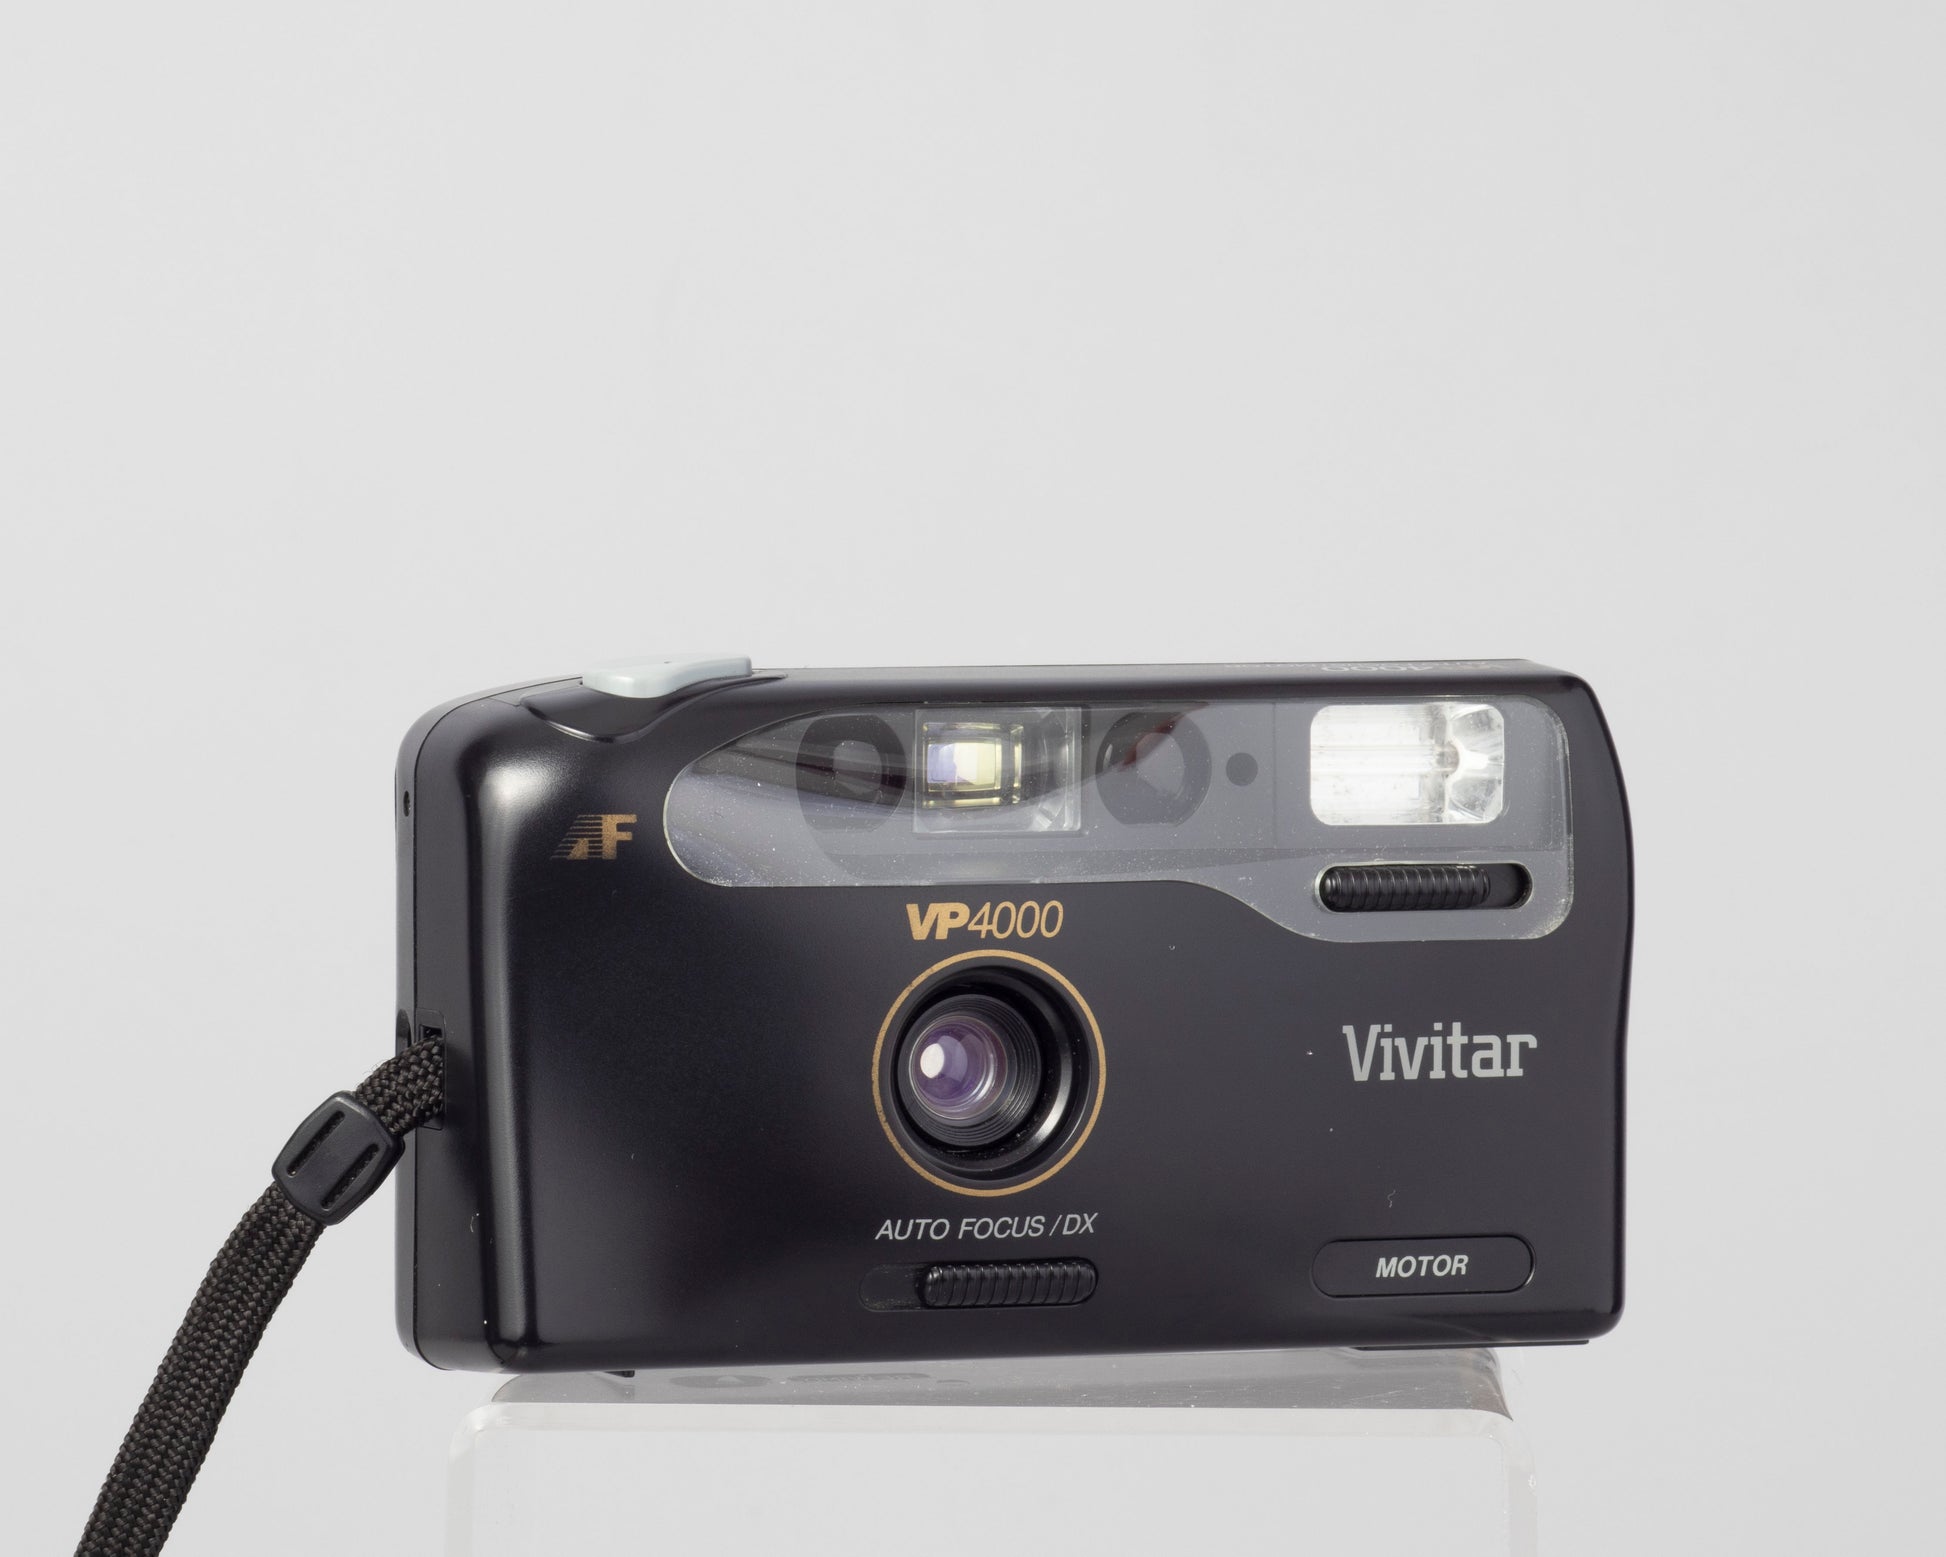 The Vivitar VP4000 is a basic but solidly made point-and-shoot from the 1990s